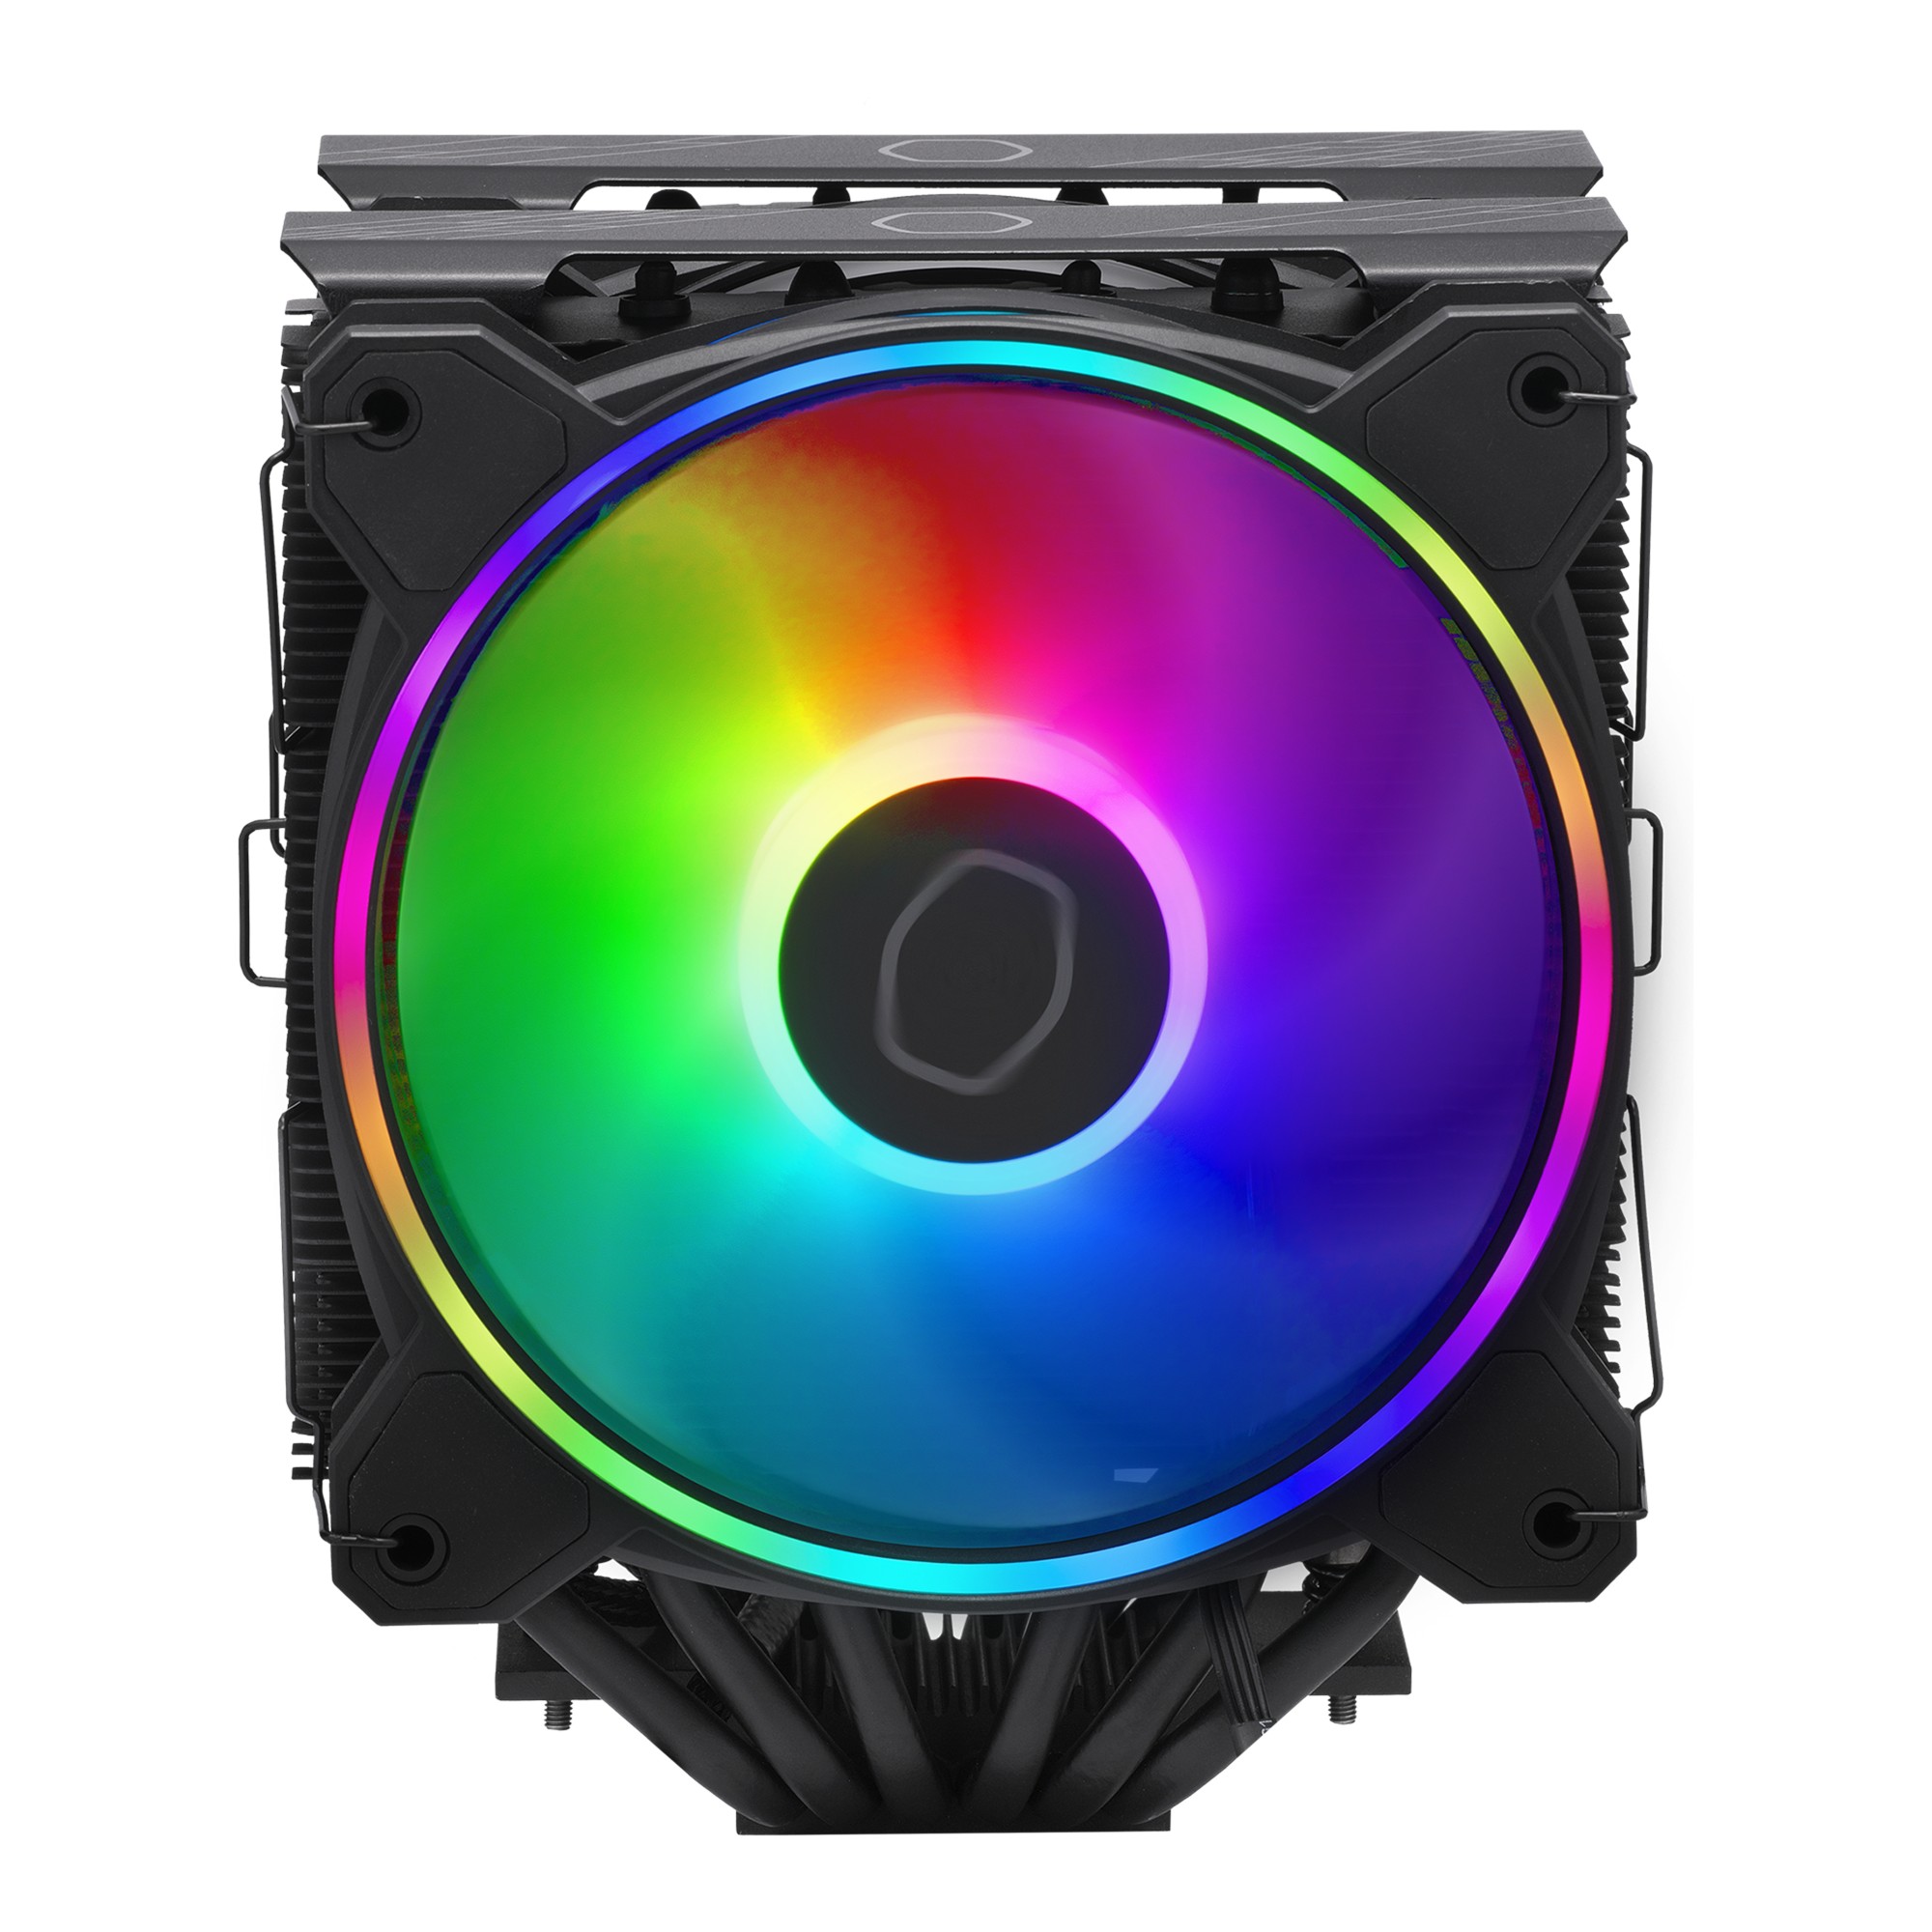 RR-D6BB-20PA-R1 COOLER MASTER Hyper 622 Halo Dual-Tower CPU Cooler, Black, 6 Heatpipes, 2x 120mm RGB Fans, Intel/AMD